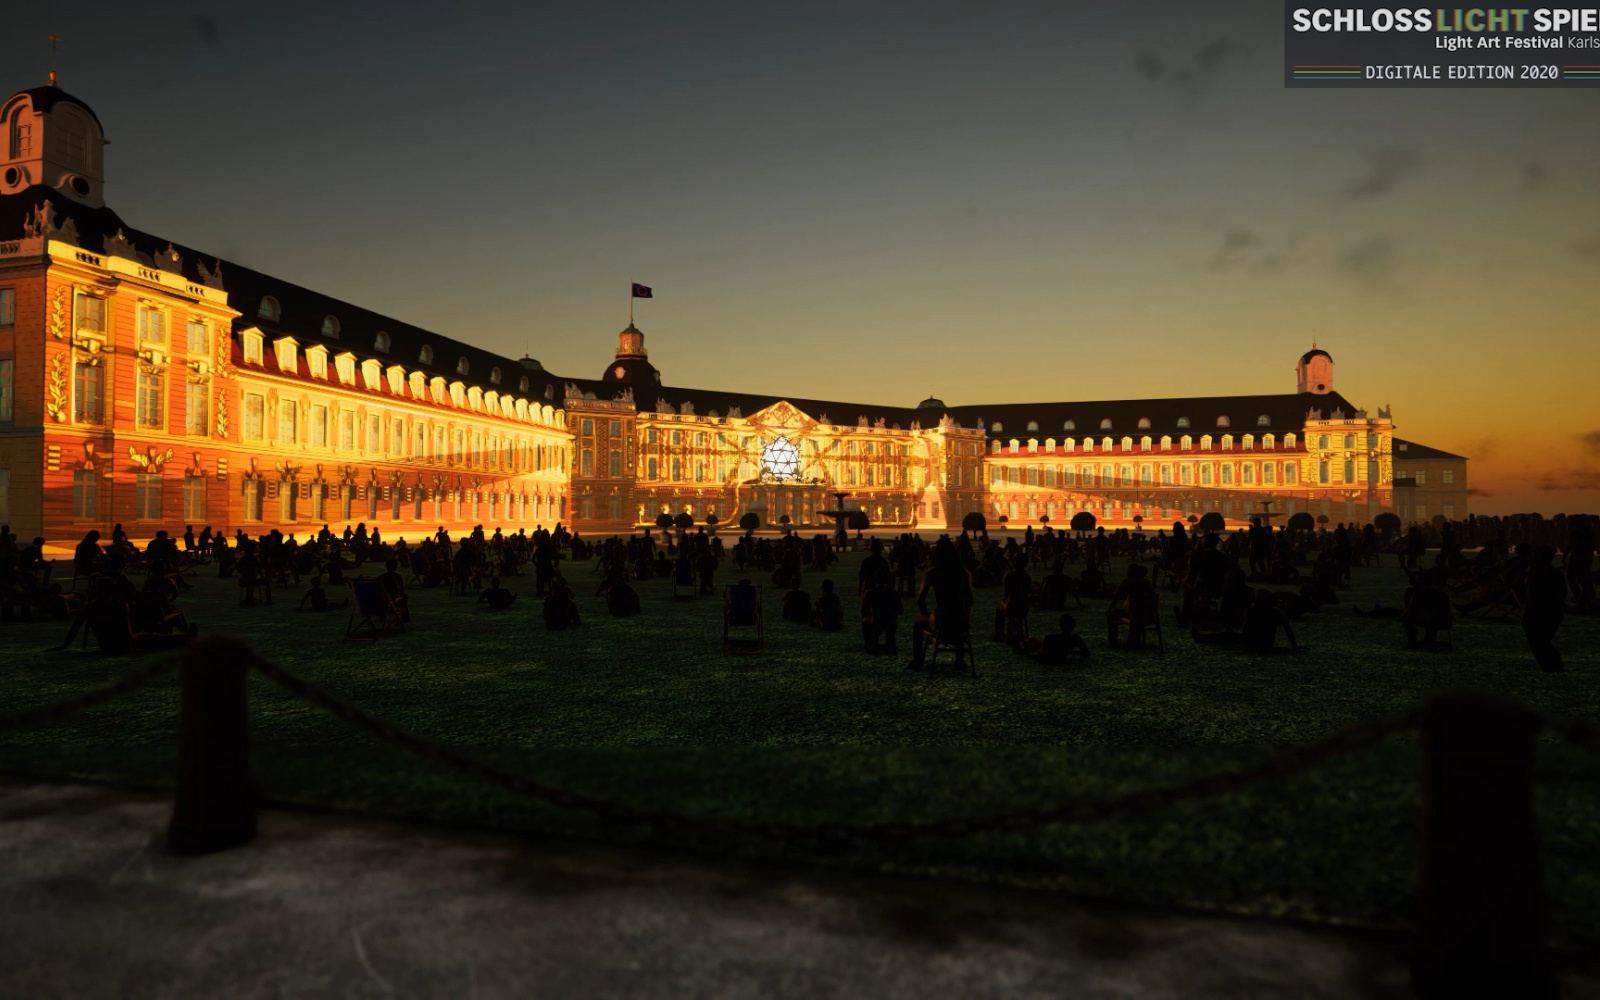 The Karlsruhe palace is digitally reconstructed.An artificial play of light is projected onto its façade, which works more with colours than forms. In front of the castle there is a crowd of people, but it is also digitally reproduced.